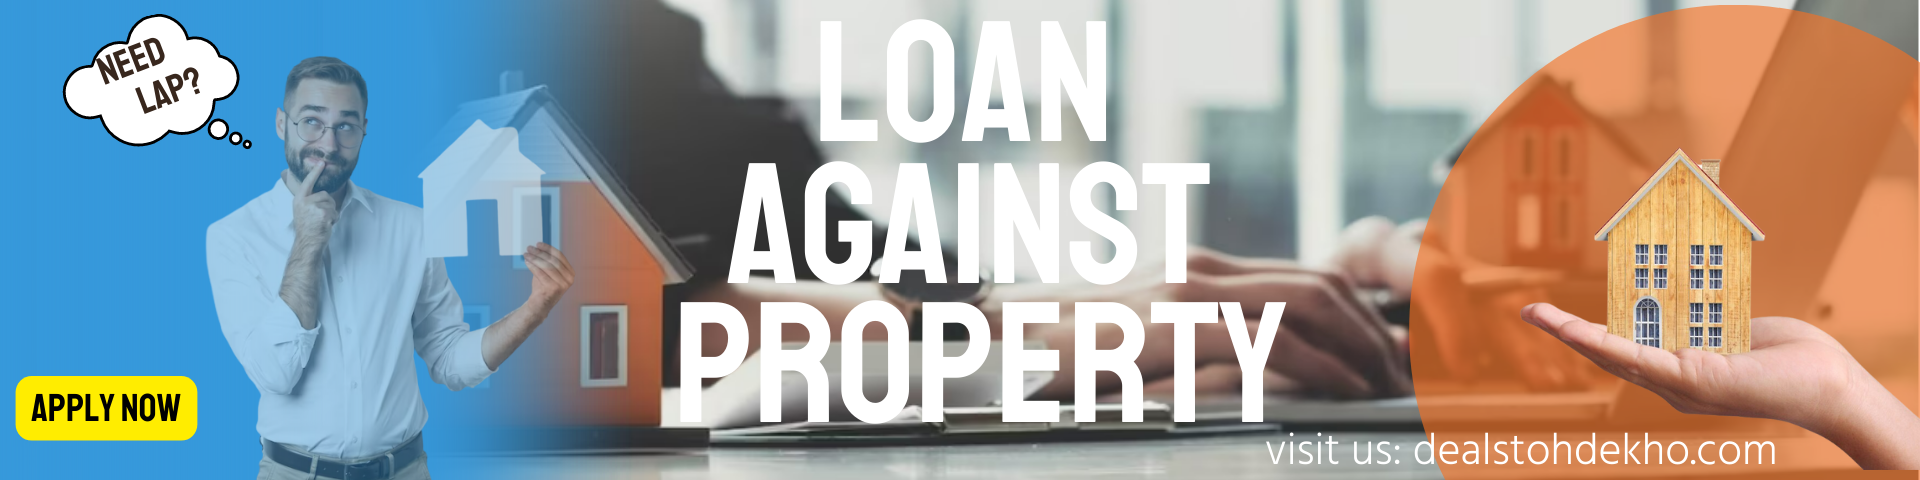 apply loan against property at 8.45%